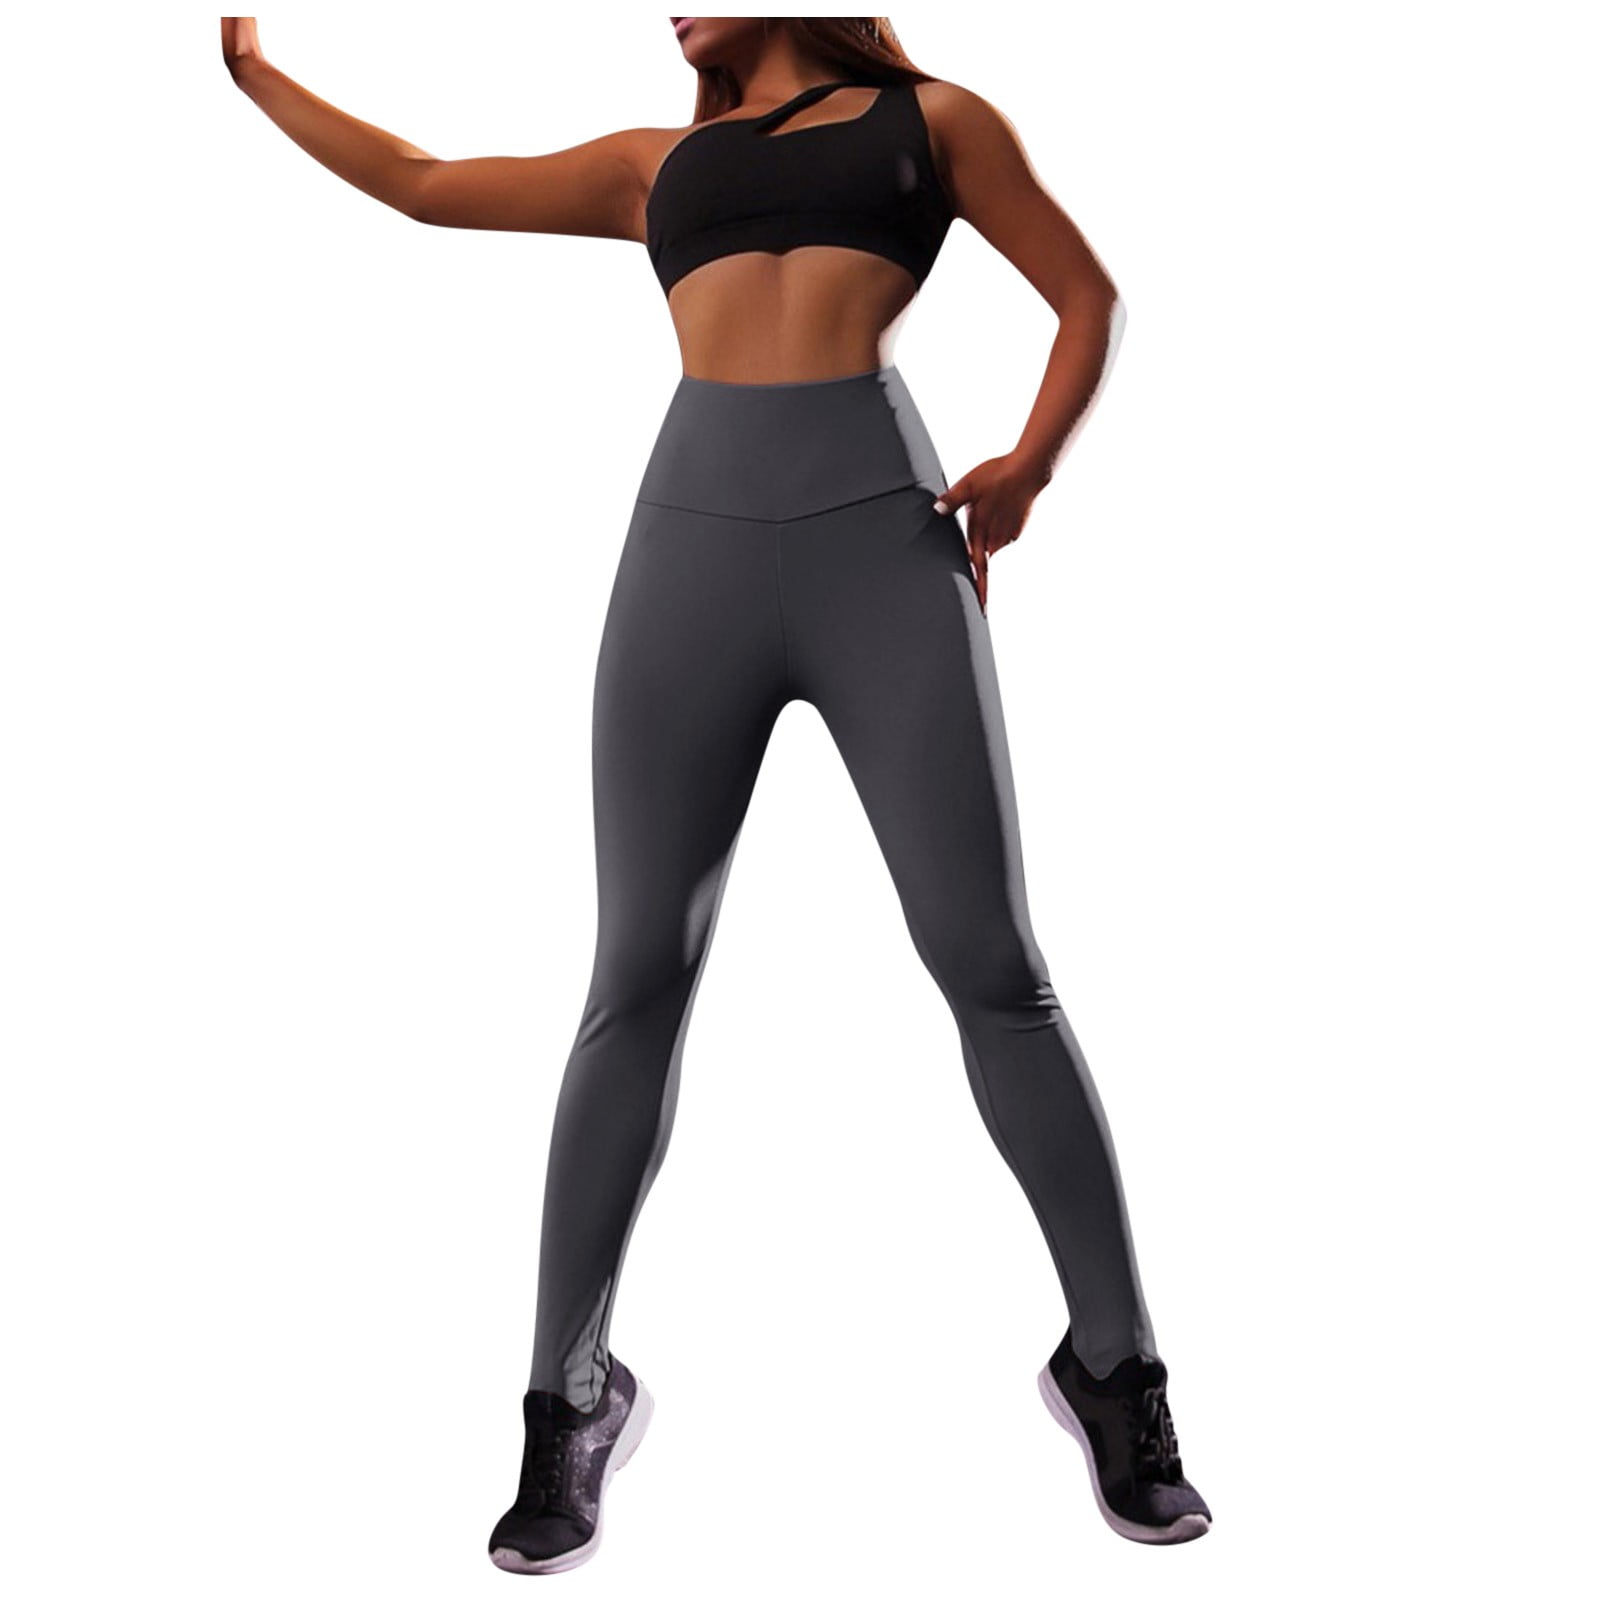 for Gym Cycling Yoga EERTX Women Stretch Yoga Pants Slim Fit Sports Trousers Leggings Fitness Running Gym Sports Pockets Active Pants Running Daily Leisure 